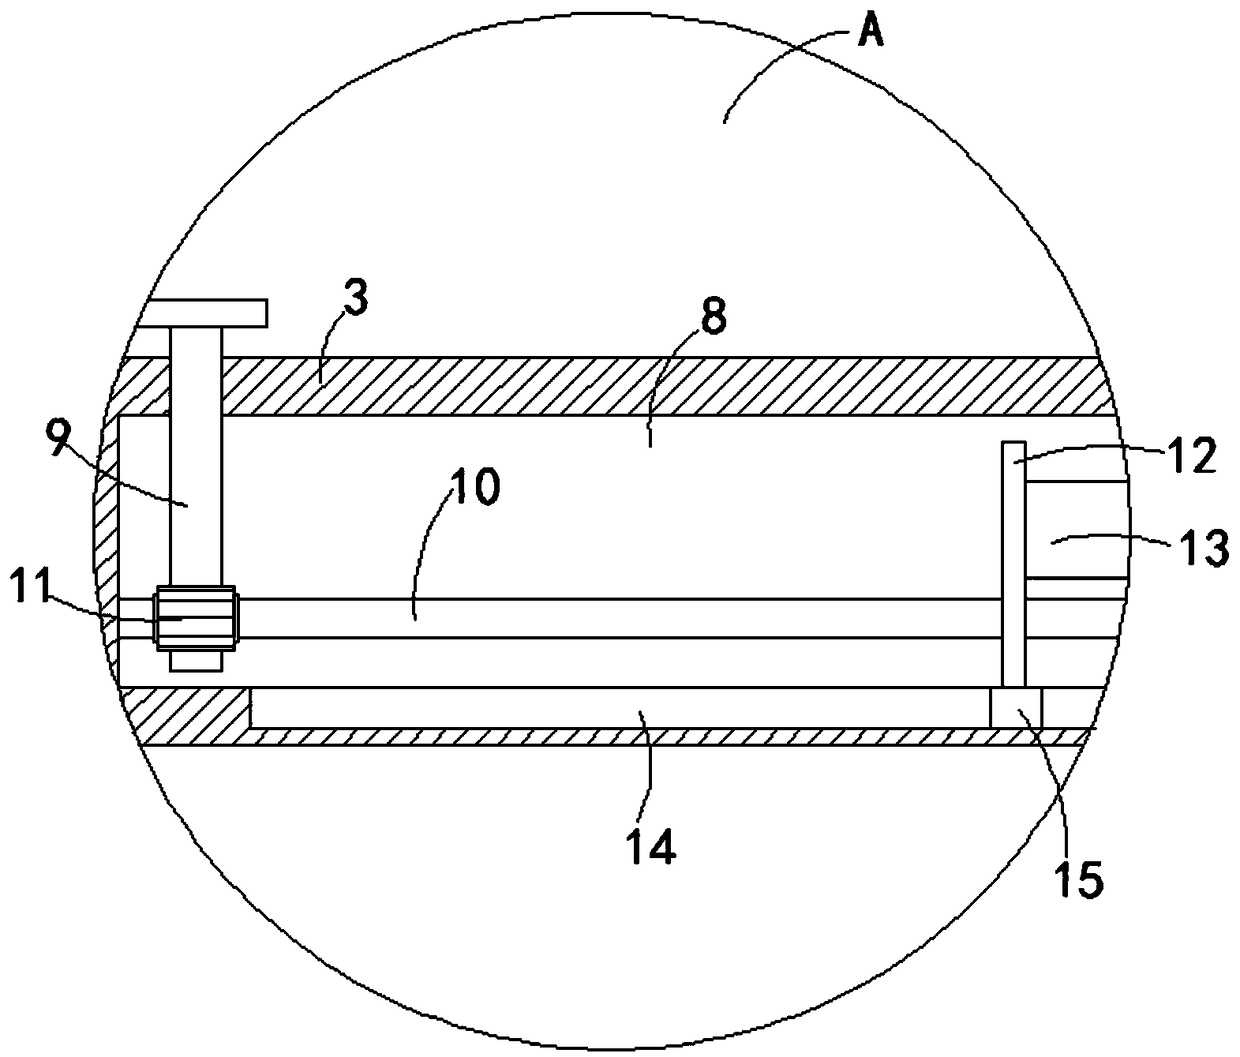 Grafting device for seed watermelons